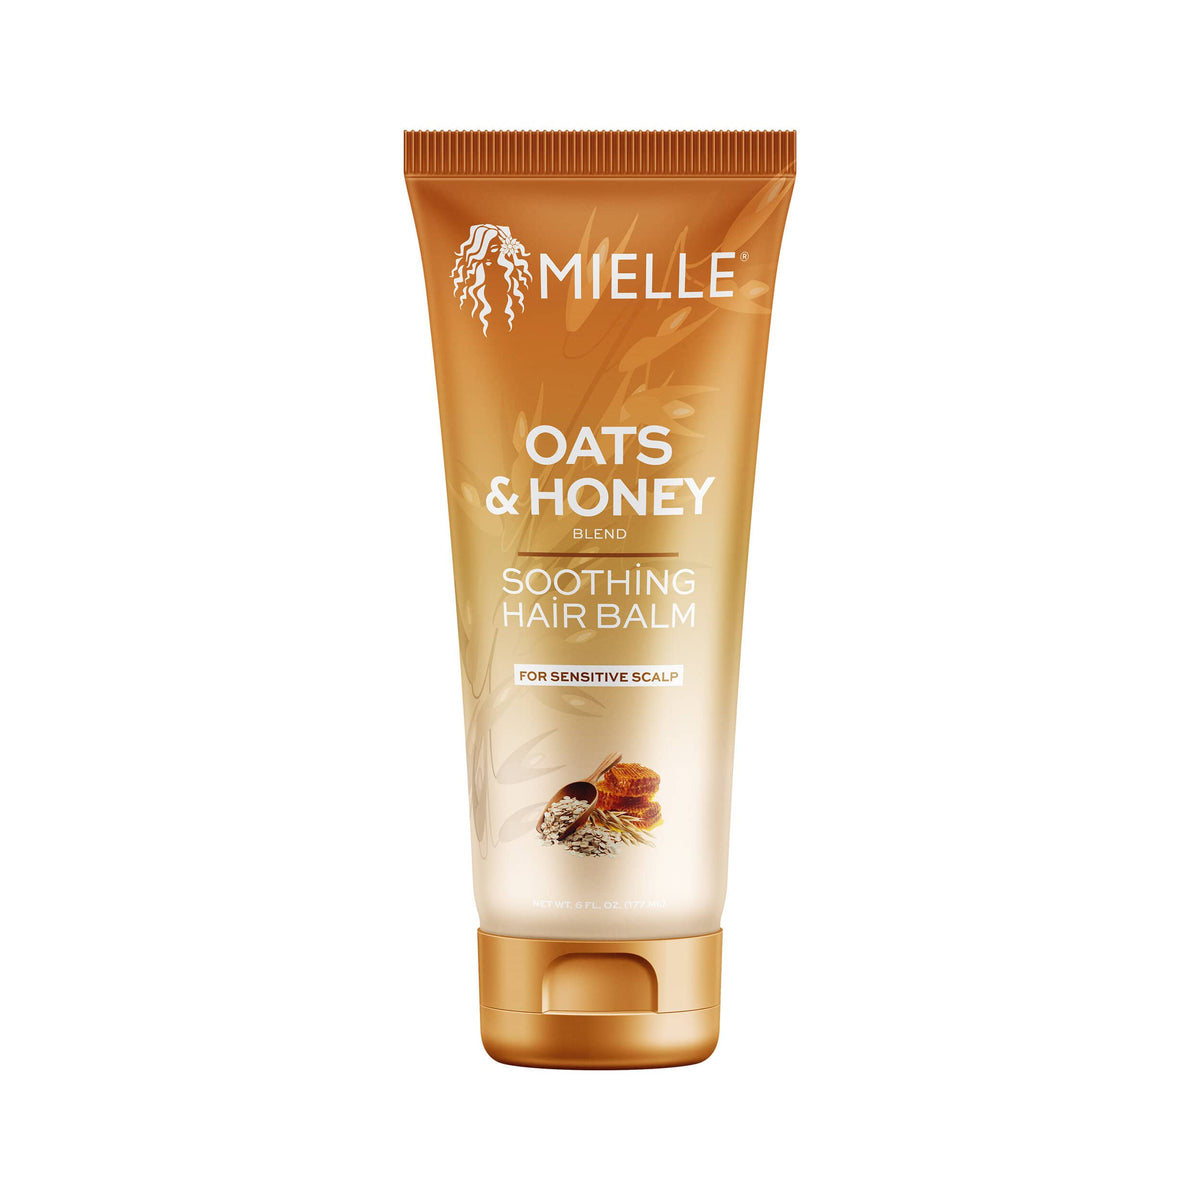 Oats & Honey Soothing Hair Balm for Sensitive Scalp - Front